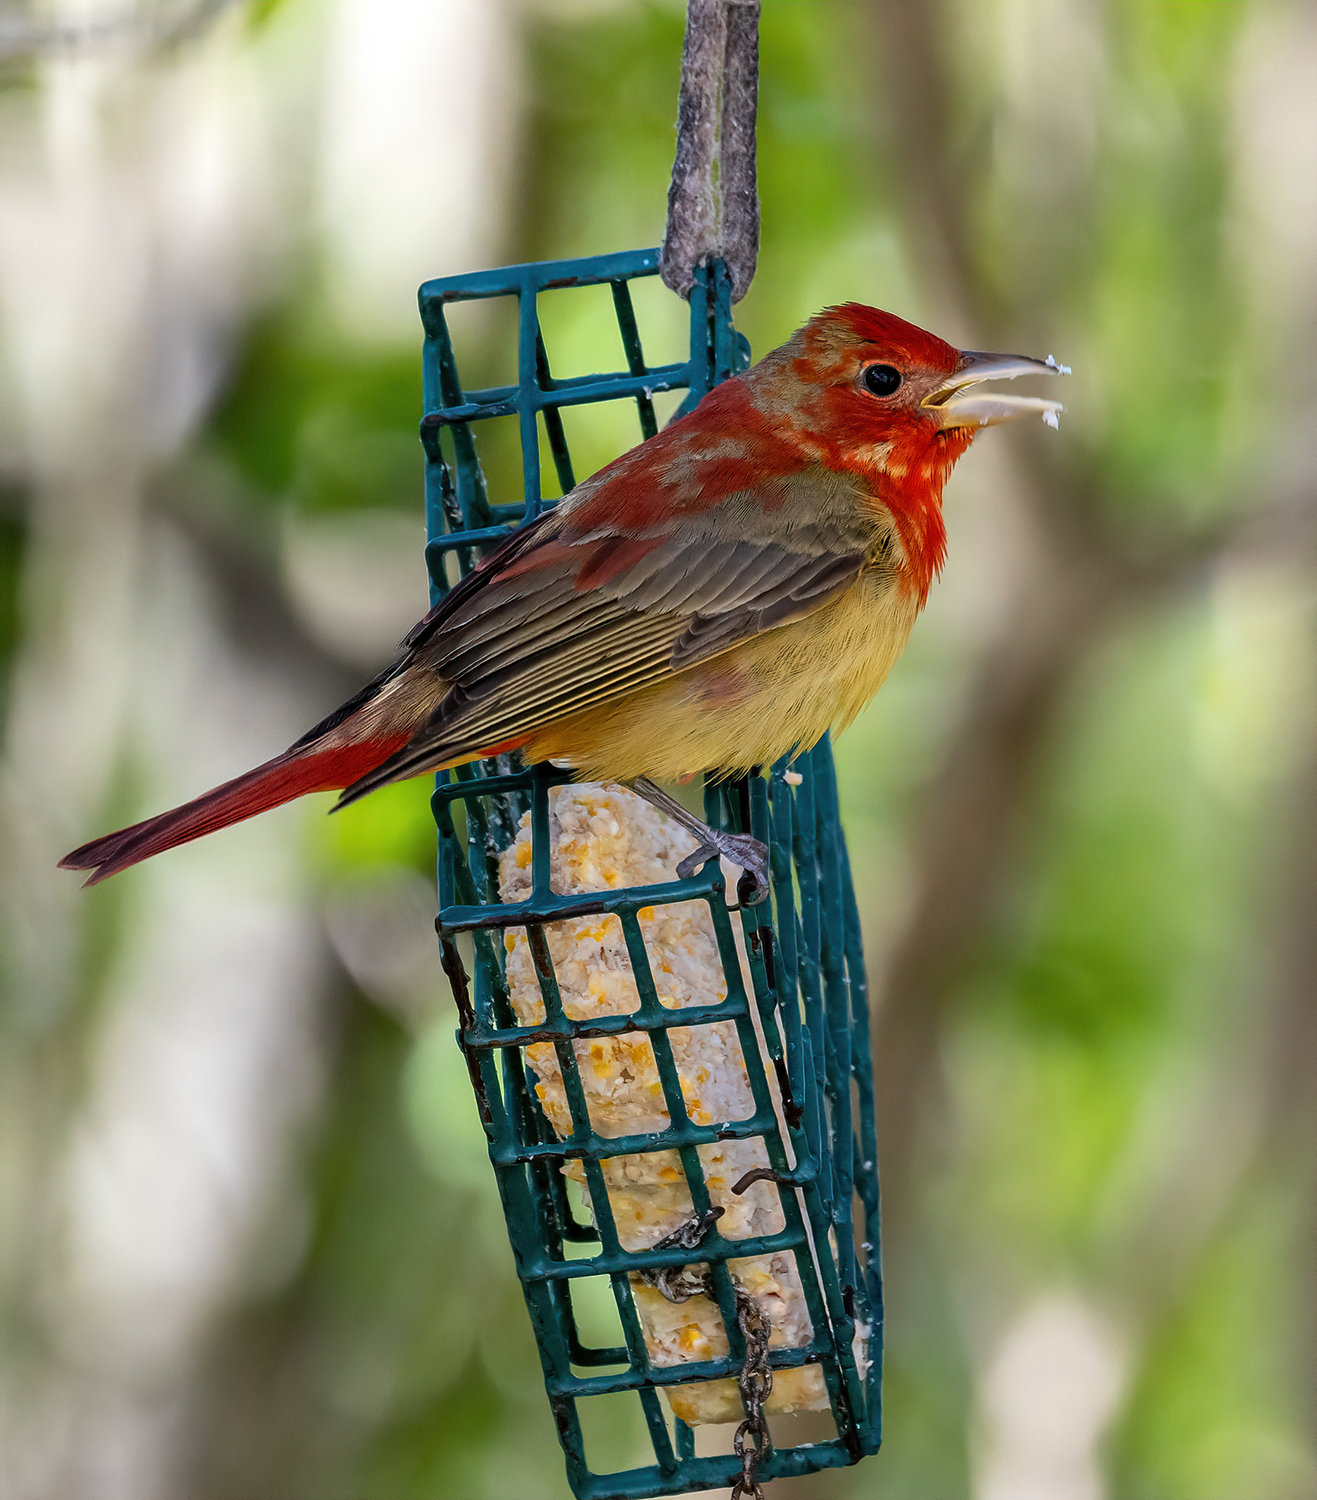 Summer Tanagers are complete migrants, spending winters between southern Mexico and mid-South America. They breed in the southeastern United States as far north as southern Iowa.